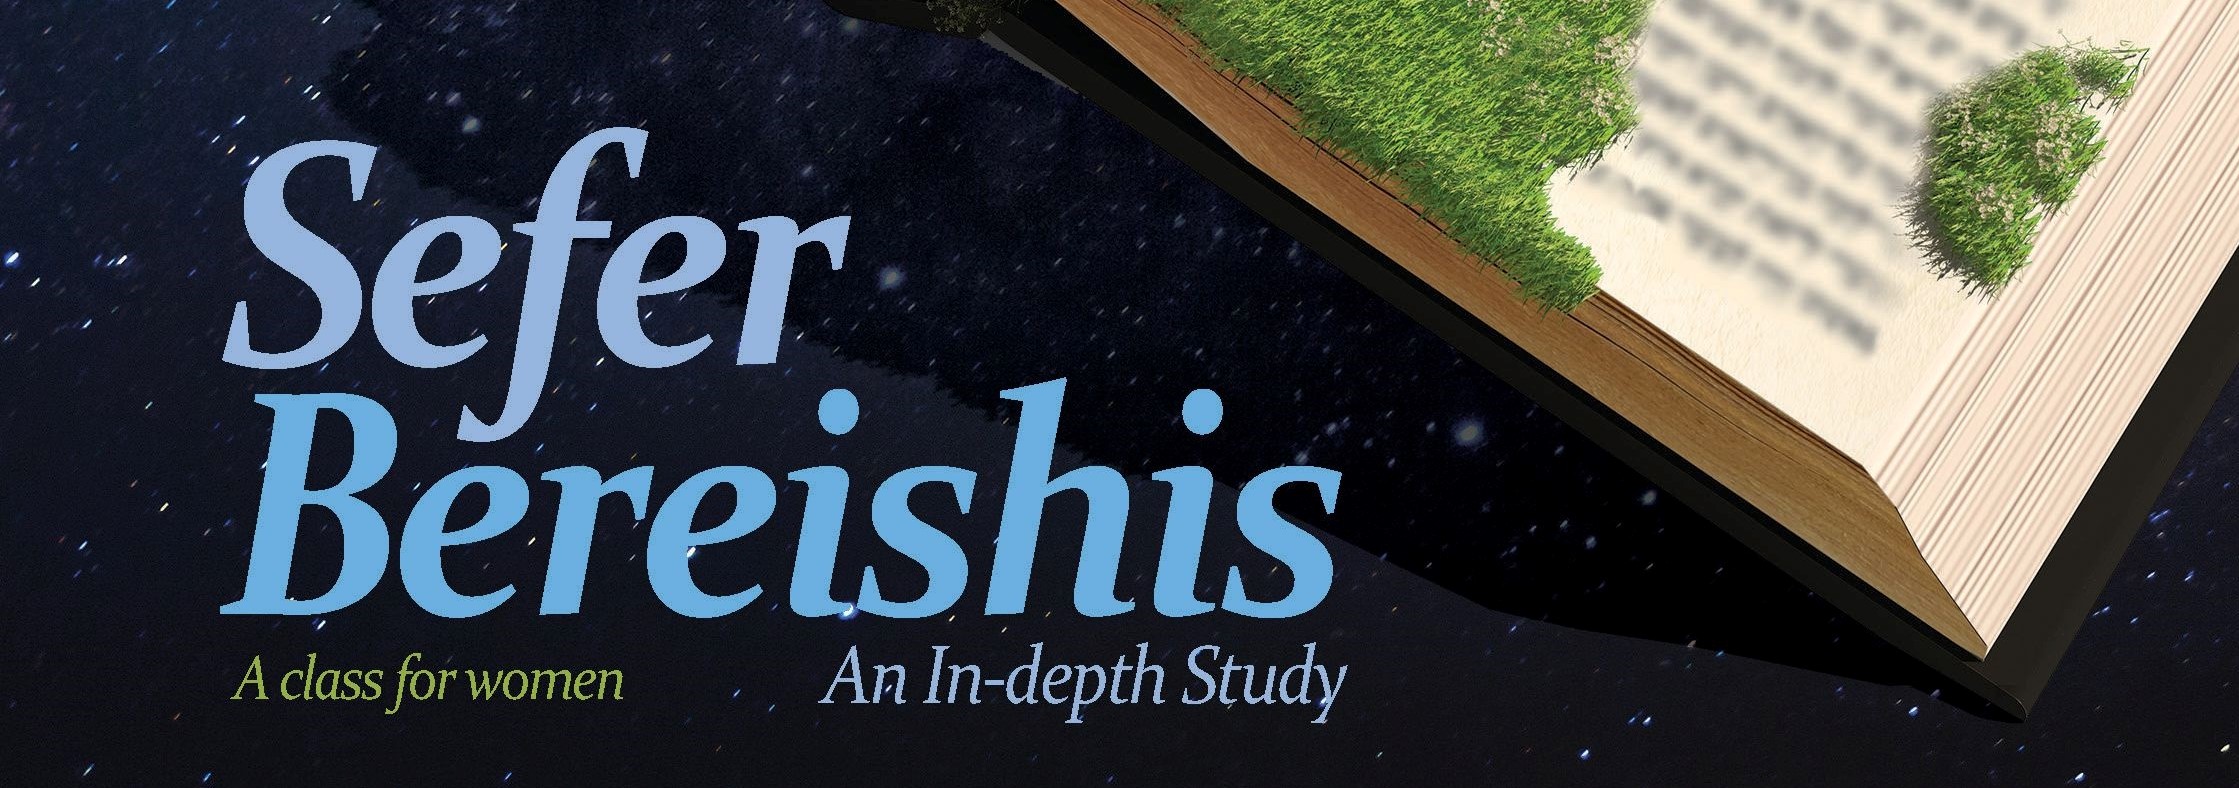 Sefer Bereishis - An In-depth Study - Resumes Oct 12